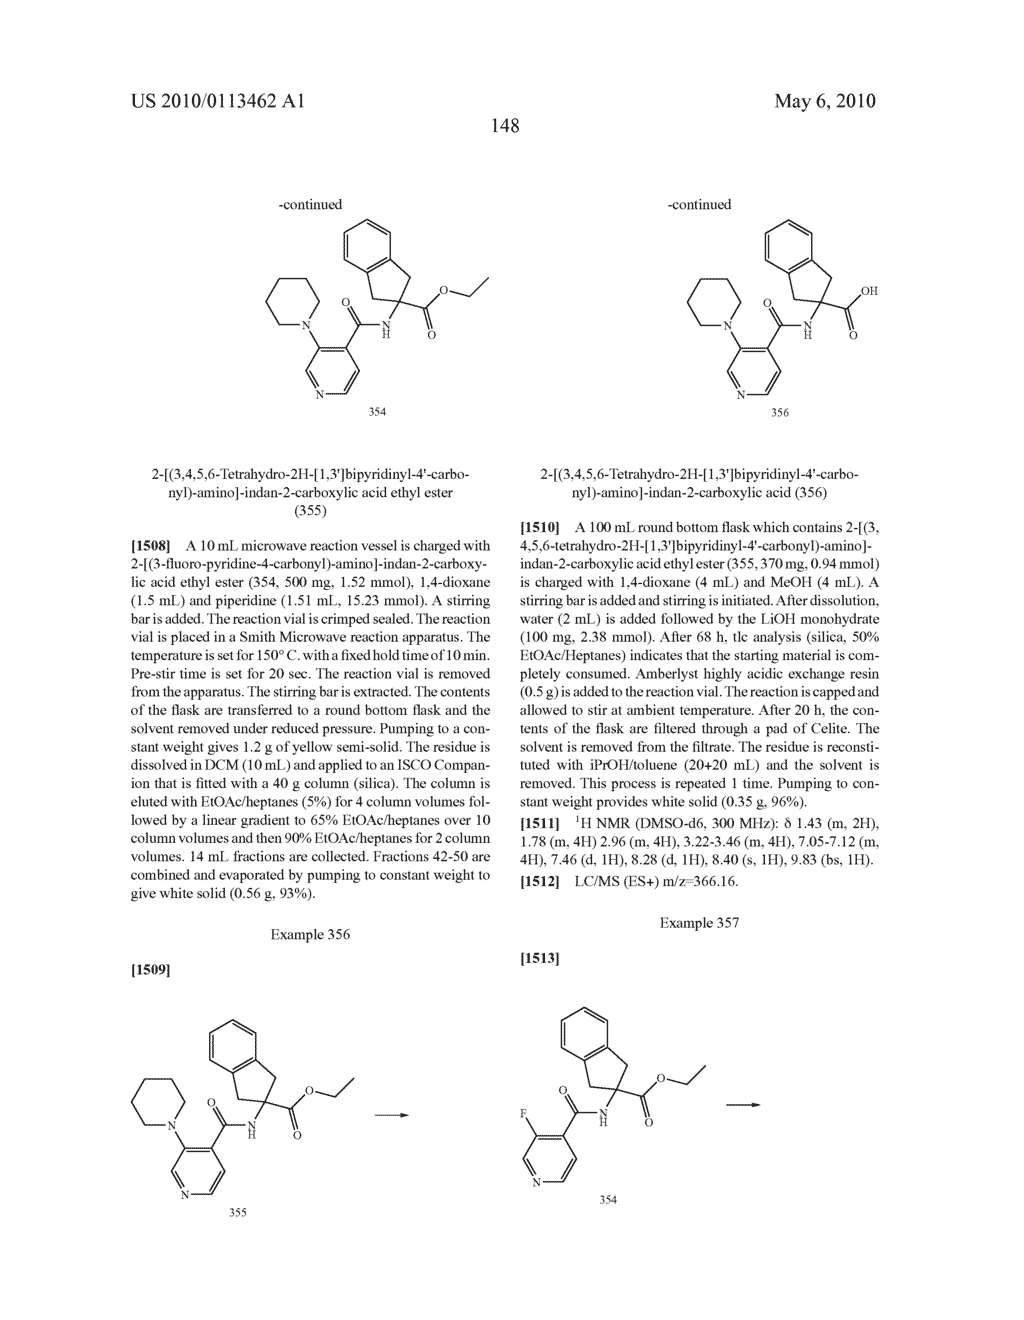 SUBSTITUTED BENZOYLAMINO-INDAN-2-CARBOXYLIC ACIDS AND RELATED COMPOUNDS - diagram, schematic, and image 149